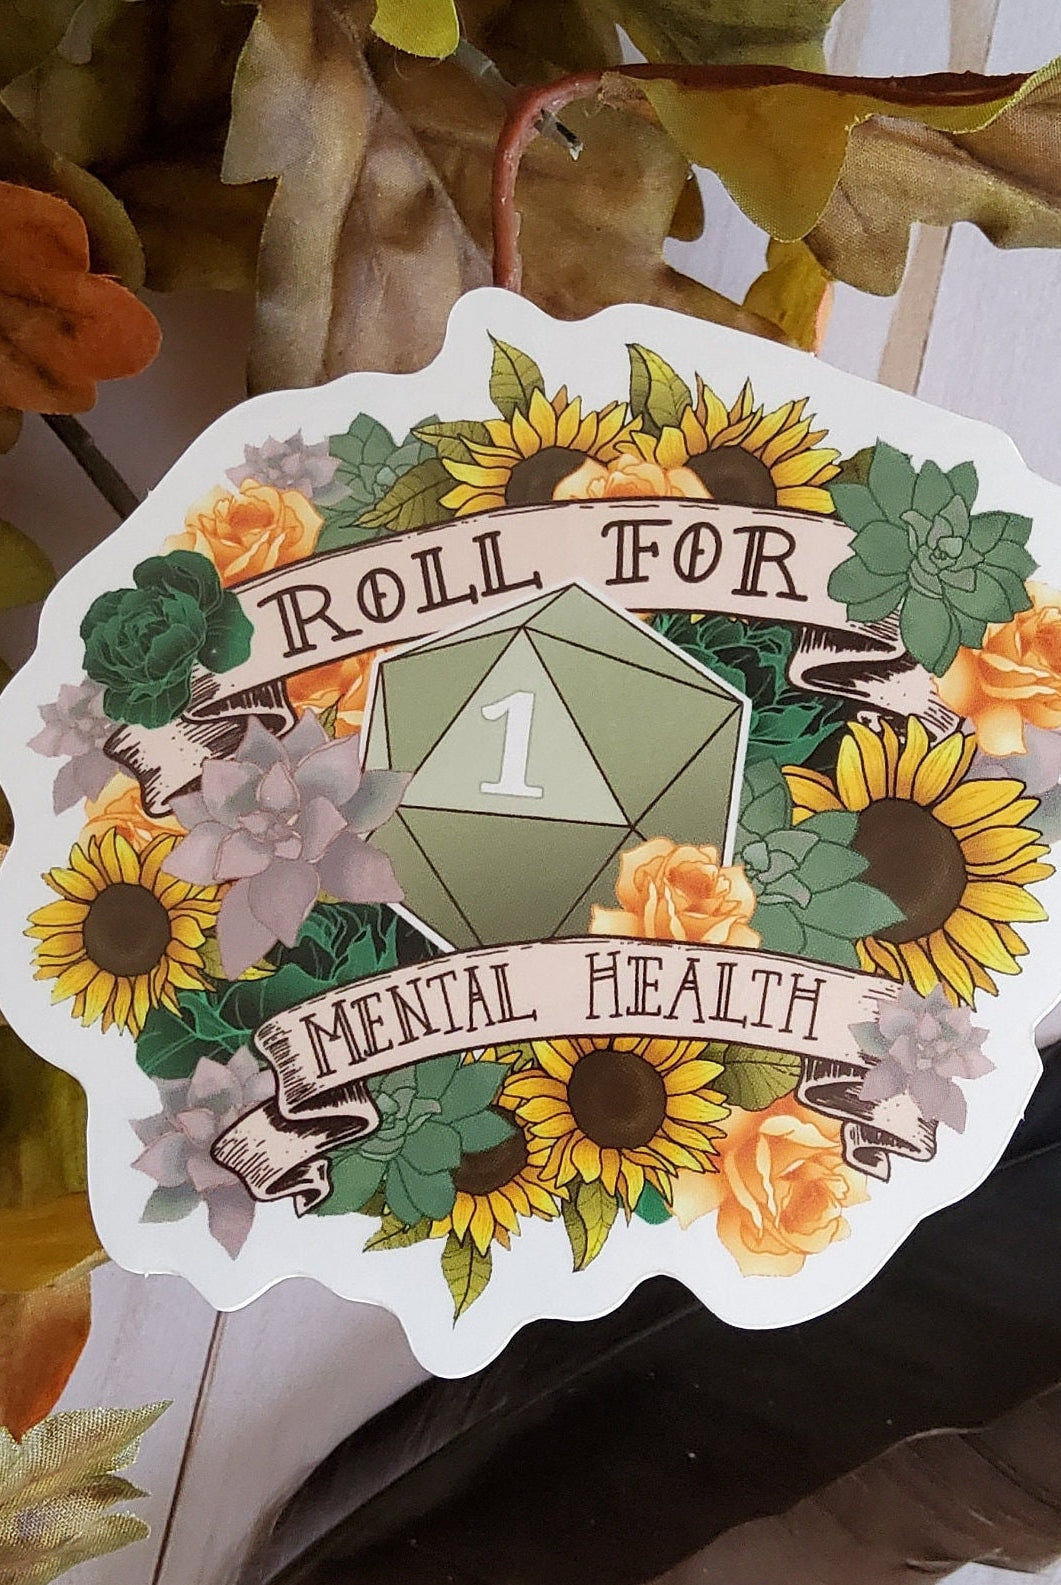 GLOSSY STICKER: D20 Roll for Mental Health Natural One , Floral D20 Sticker , Floral D20 Stickers, D20 Sticker , D20 Natural One Sticker